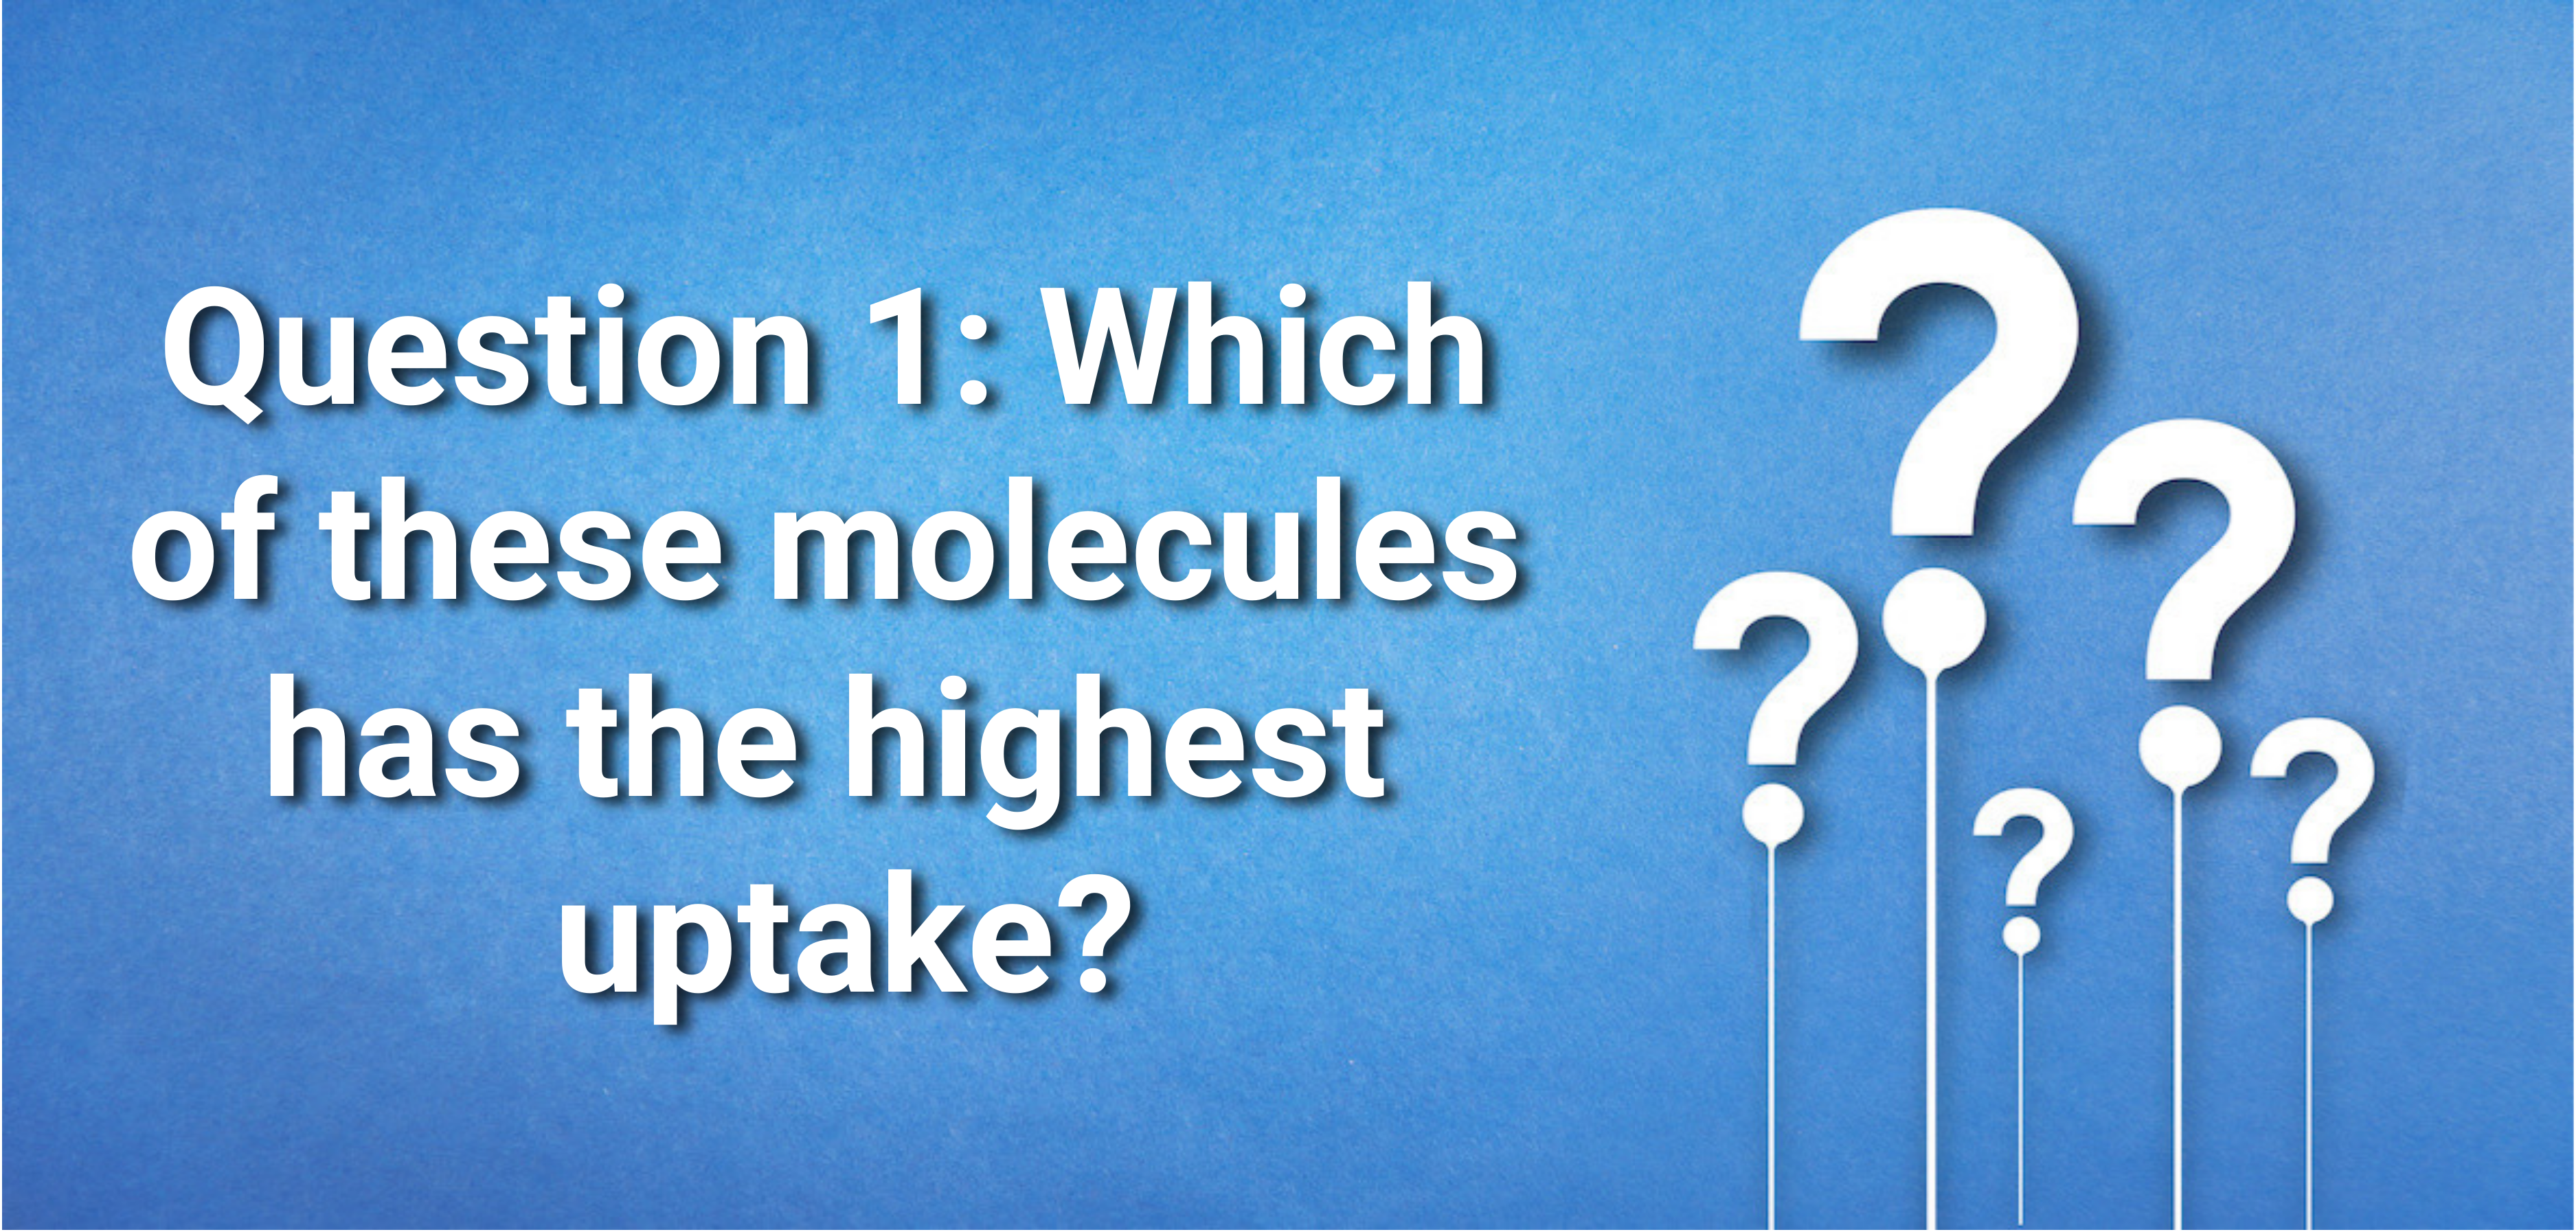 Question 1: Which of these molecules has the highest uptake?